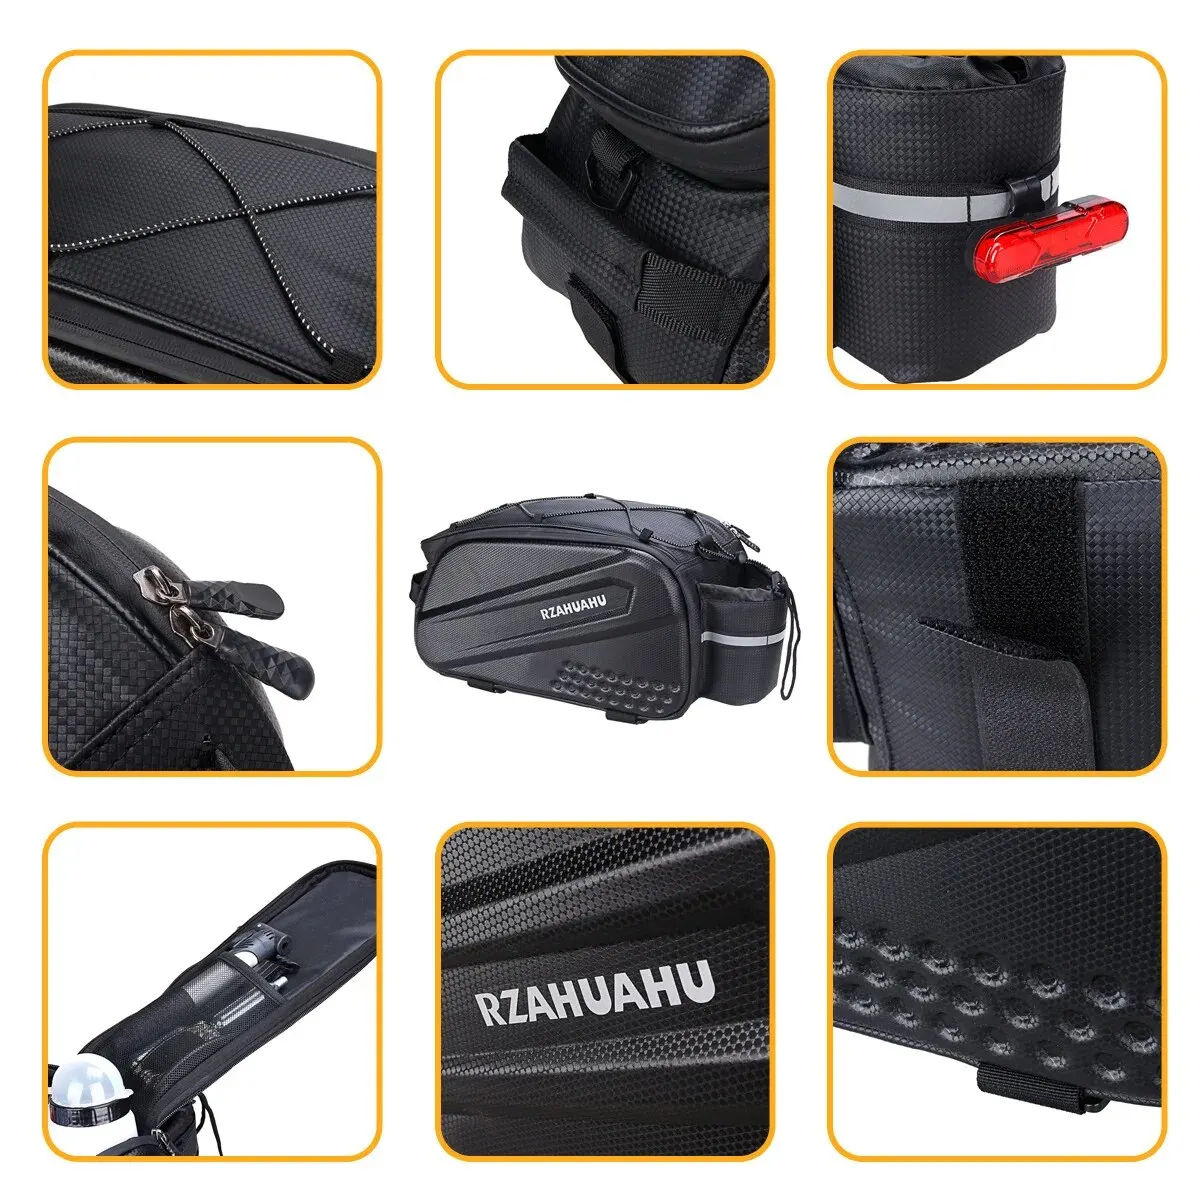 Introducing our Bicycle Camel Bag: Large Capacity Electric Foldable Rear Seat Bag for Mountain Bikes! - Bicycle bag - 2